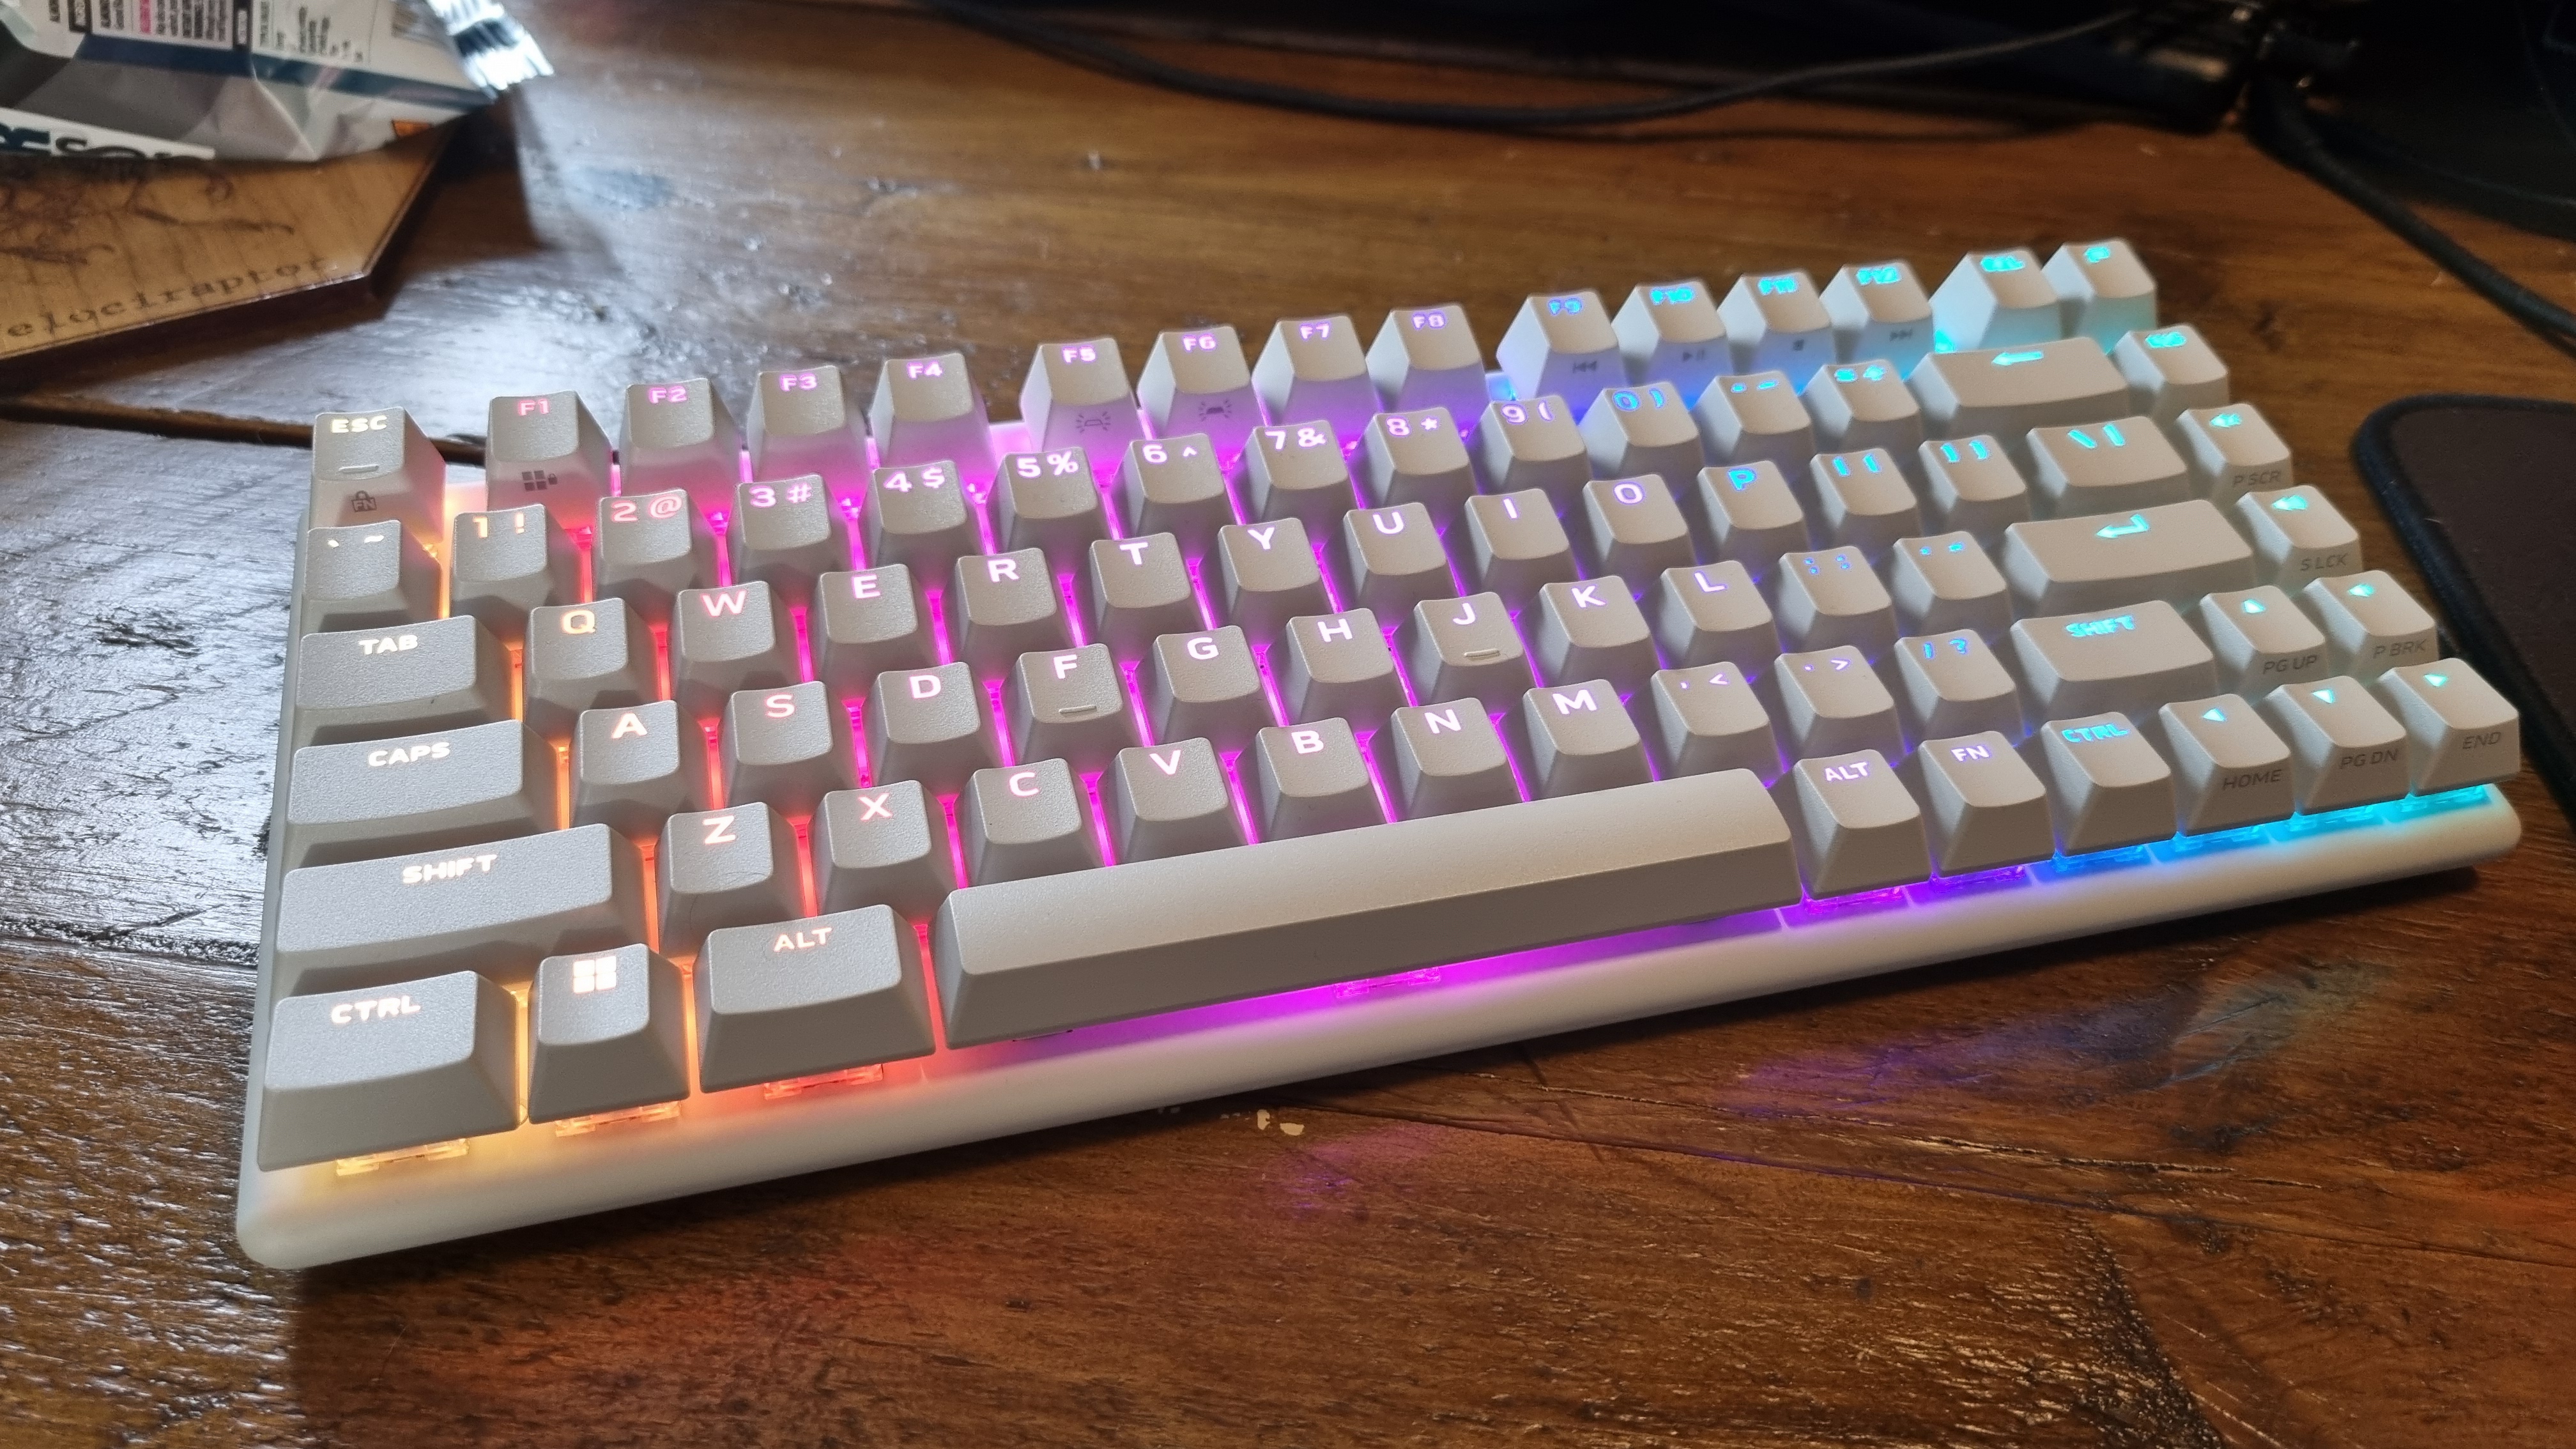 The Alienware Pro Wireless Gaming Keyboard, lit up in rainbow RGB lighting